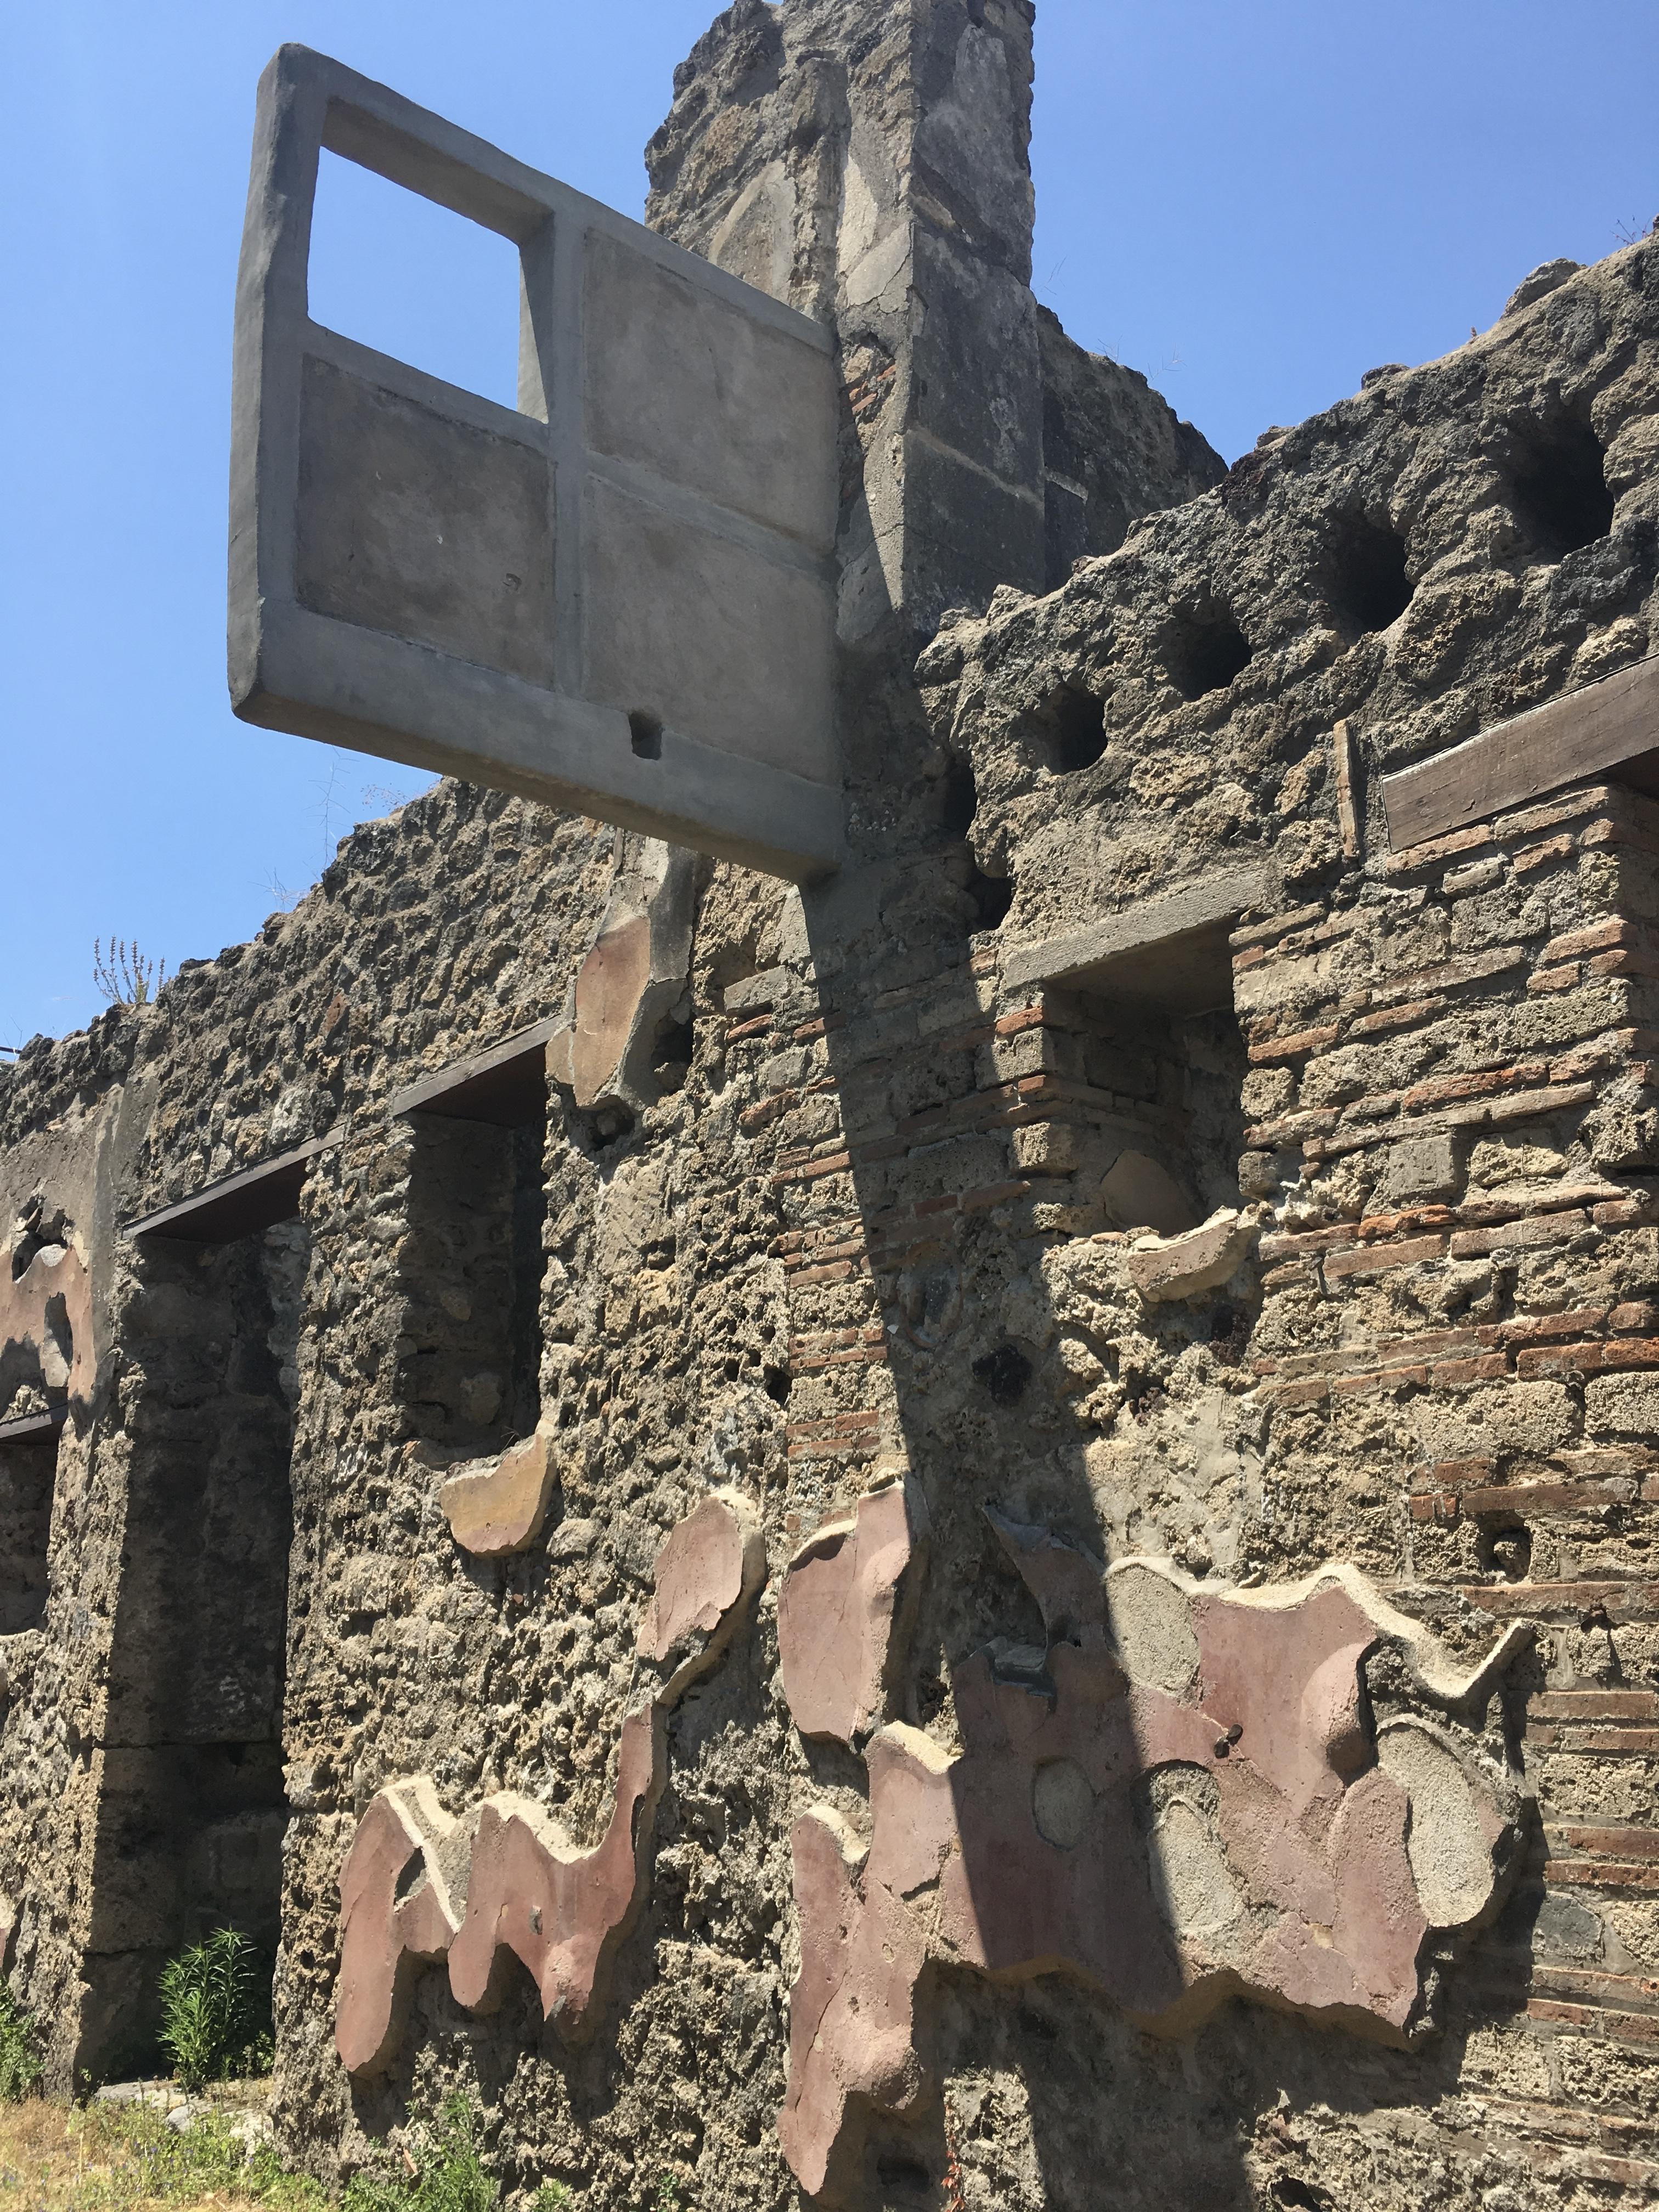 Roman "hanging balcony" partially preserved above the entrance of a 1st century CE tavern. The holes at right once housed wooden support beams. Pompeii, Italy.